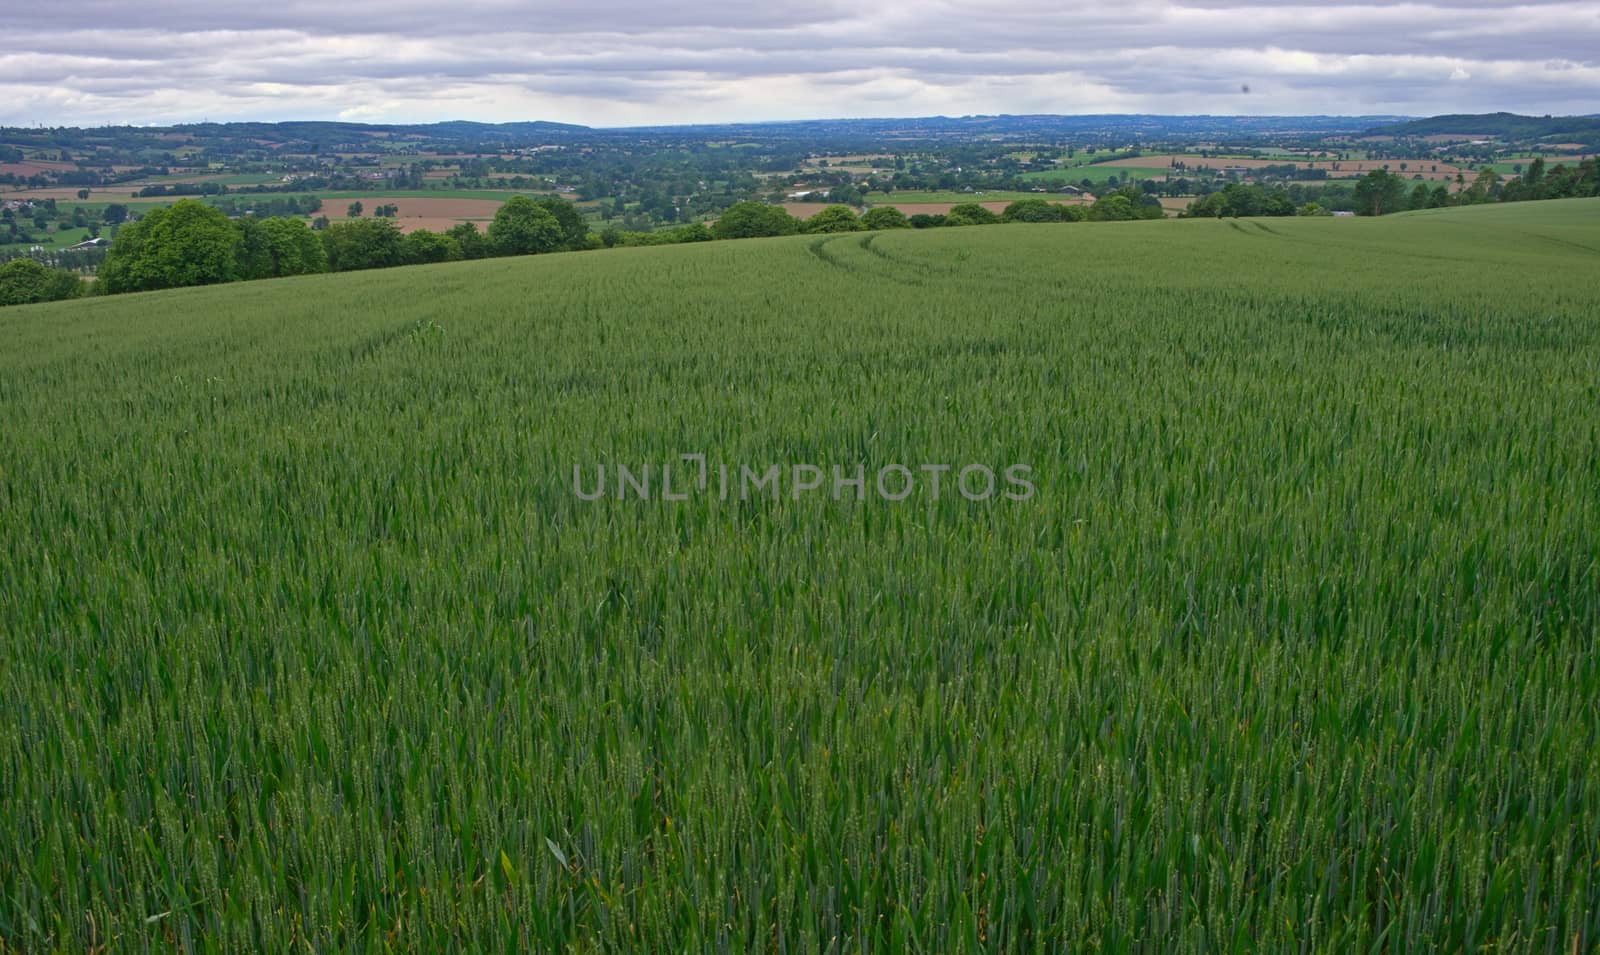 Wheat field with forests and sky in background